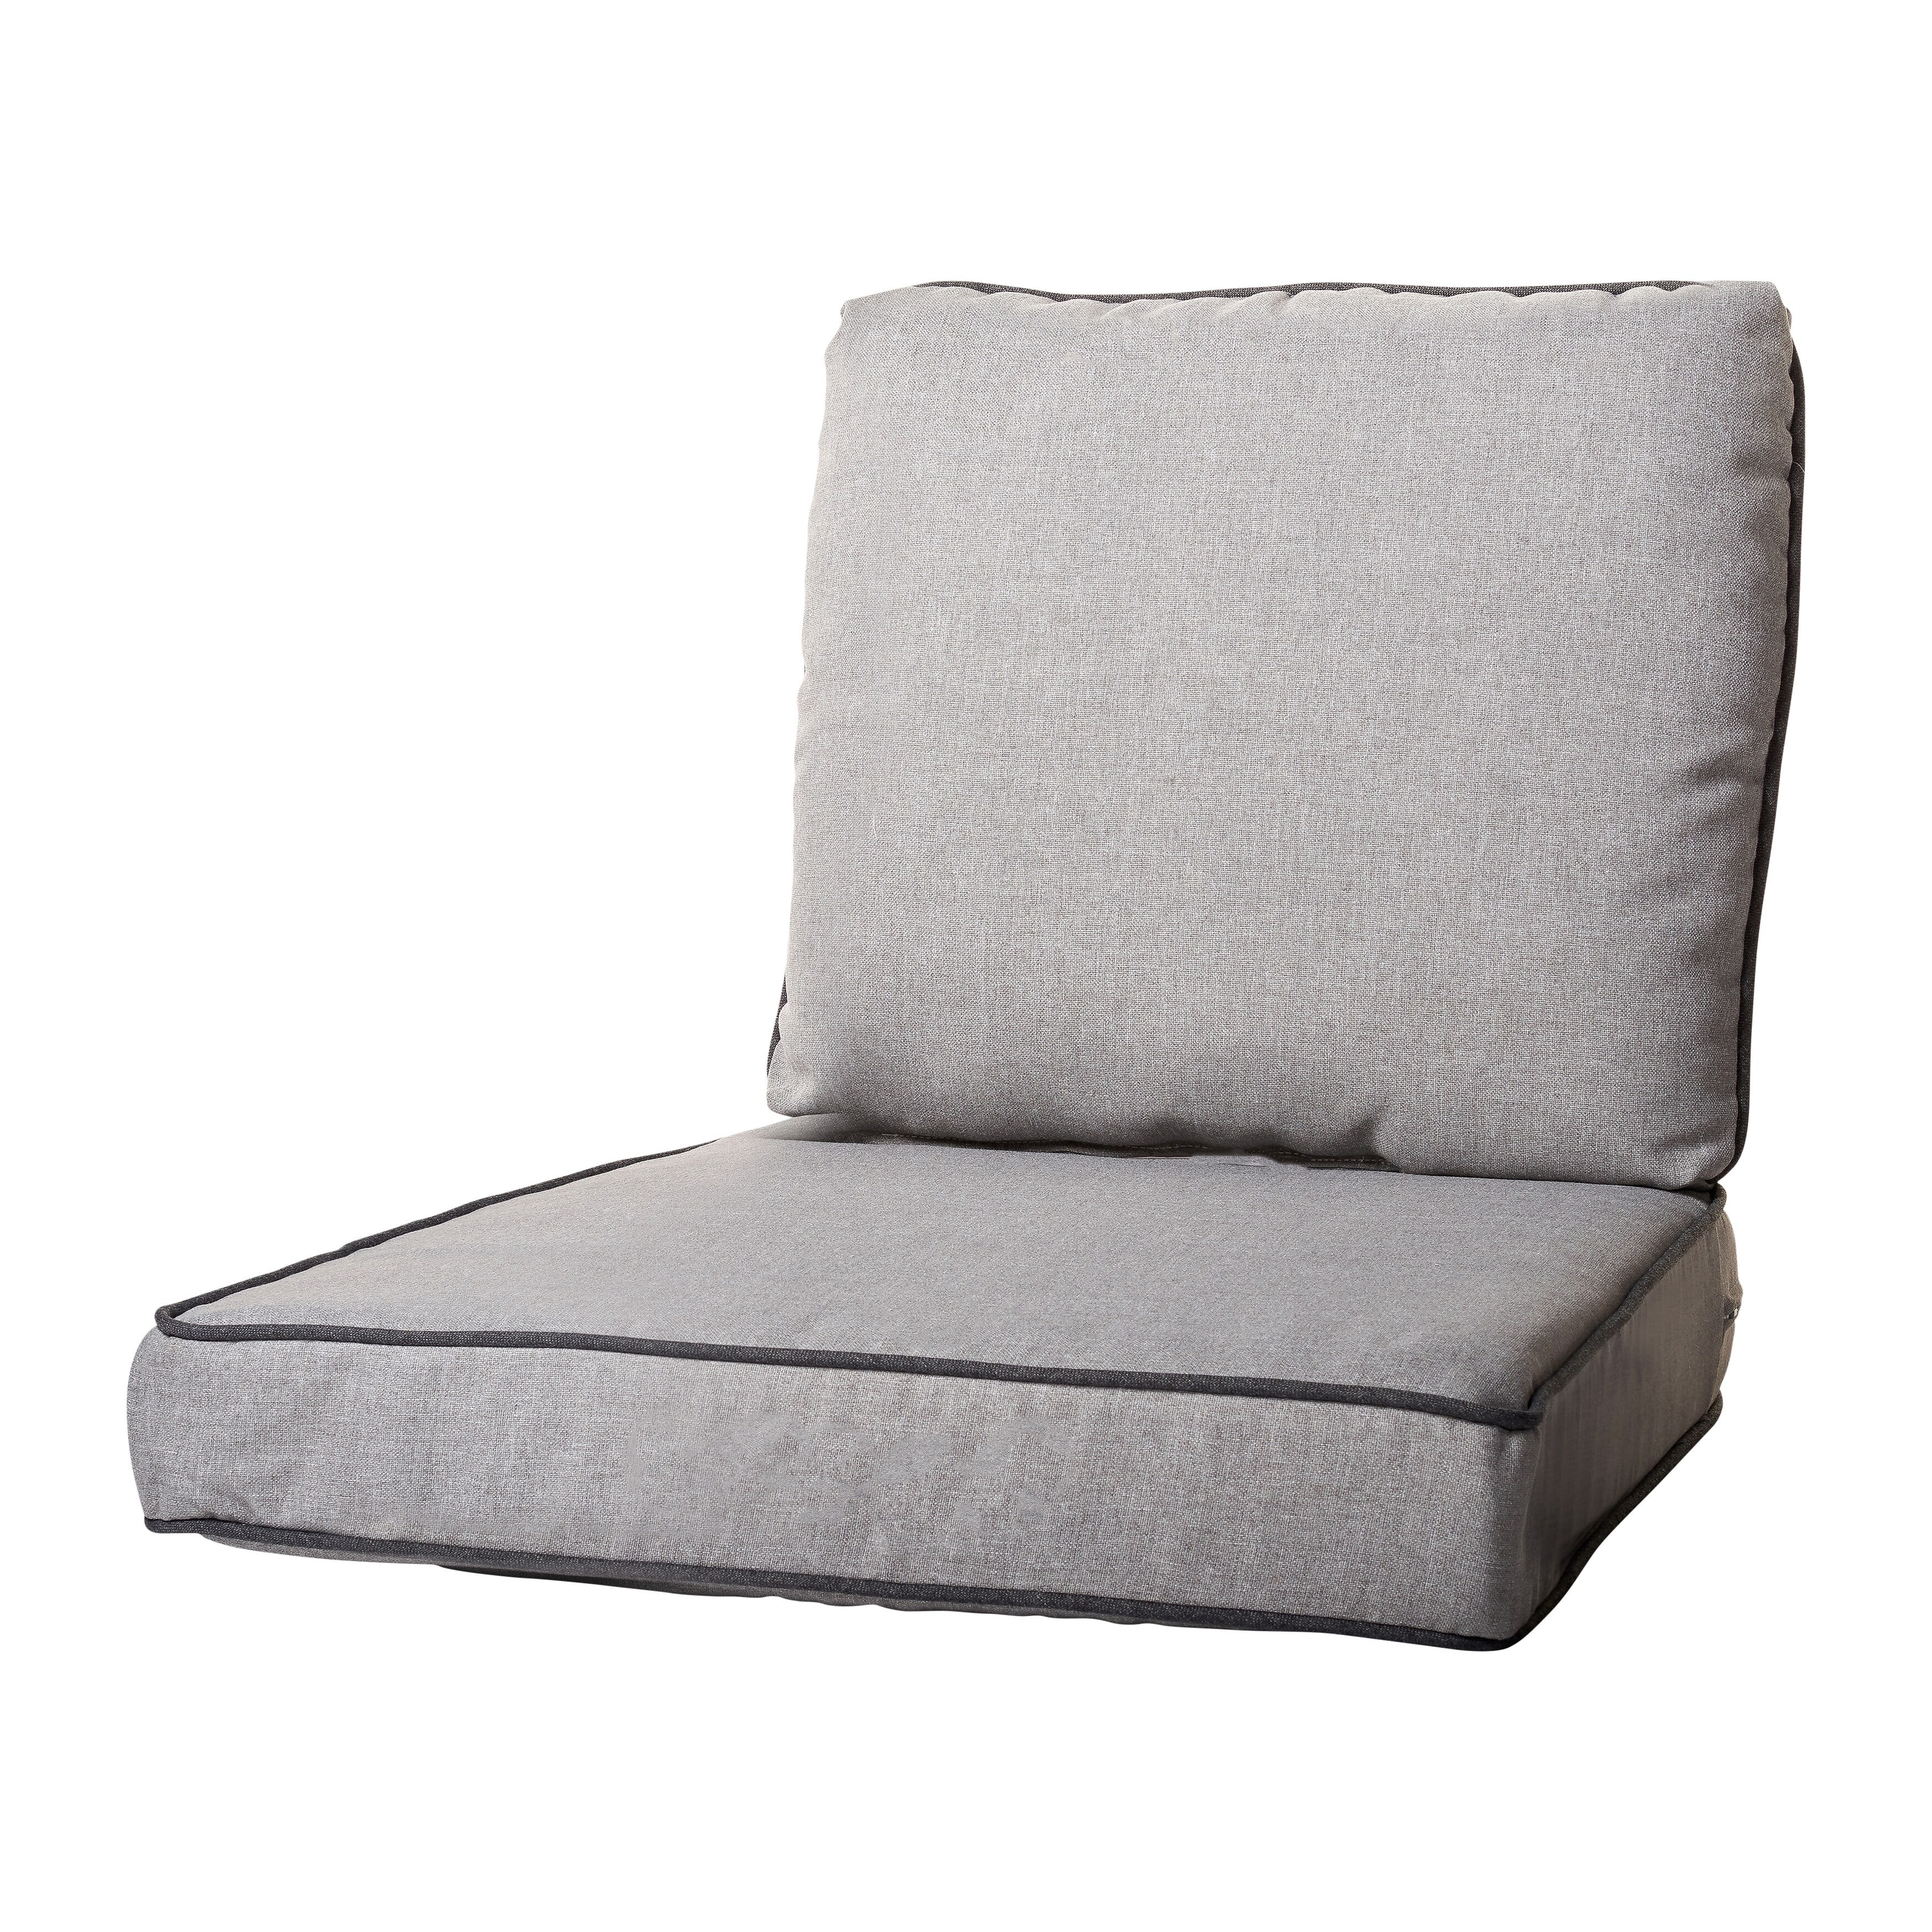 Haven Way Universal Outdoor Deep Seat Lounge Chair Cushion Set - On Sale -  Bed Bath & Beyond - 33981311